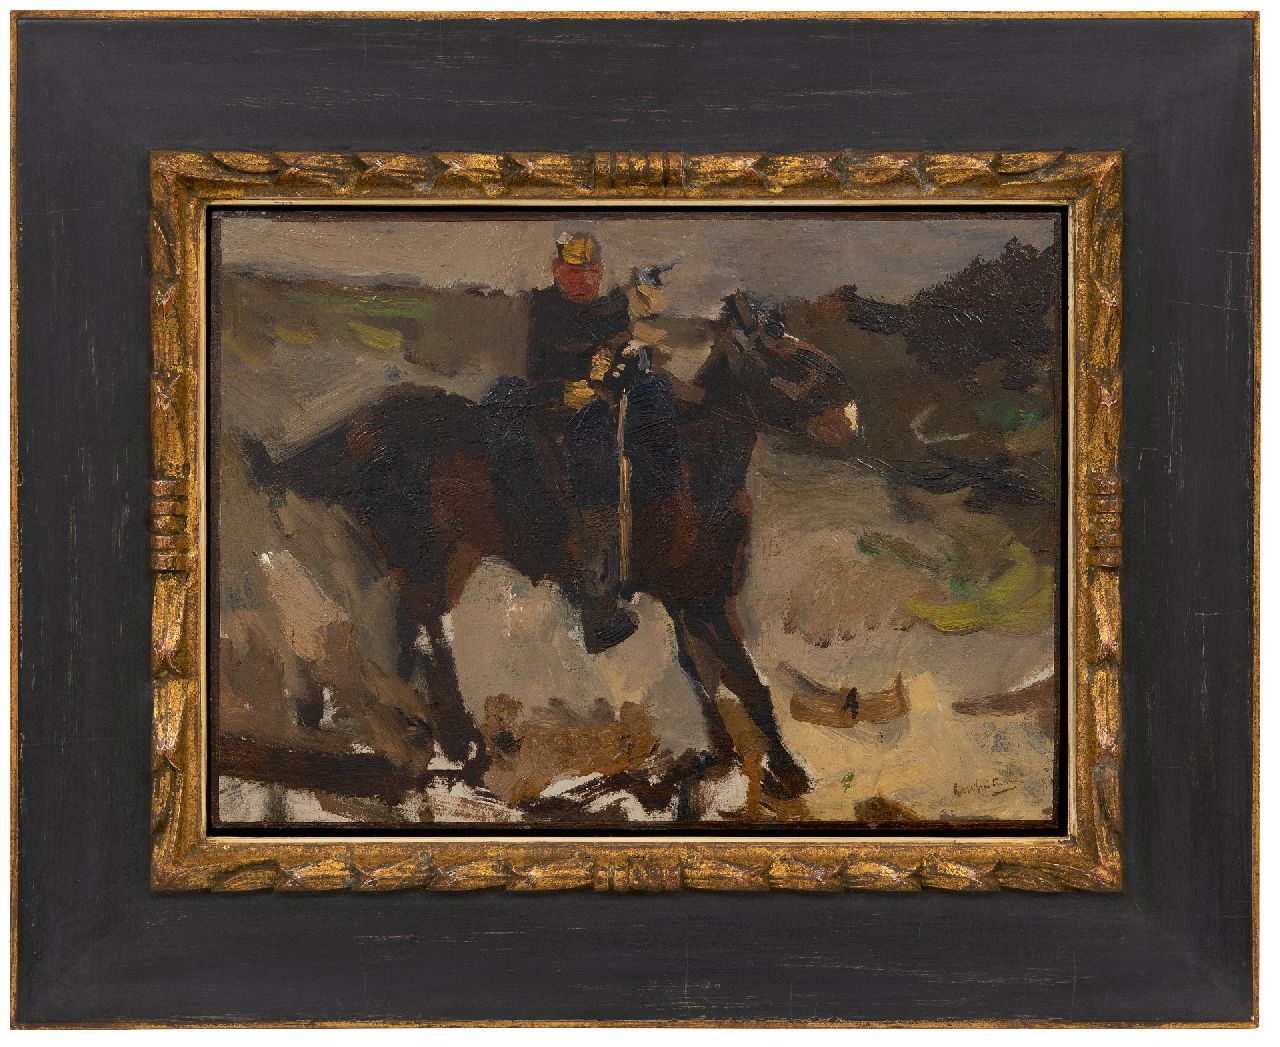 Breitner G.H.  | George Hendrik Breitner | Paintings offered for sale | Hussar on a horse, oil on panel 30.8 x 42.2 cm, signed l.r.